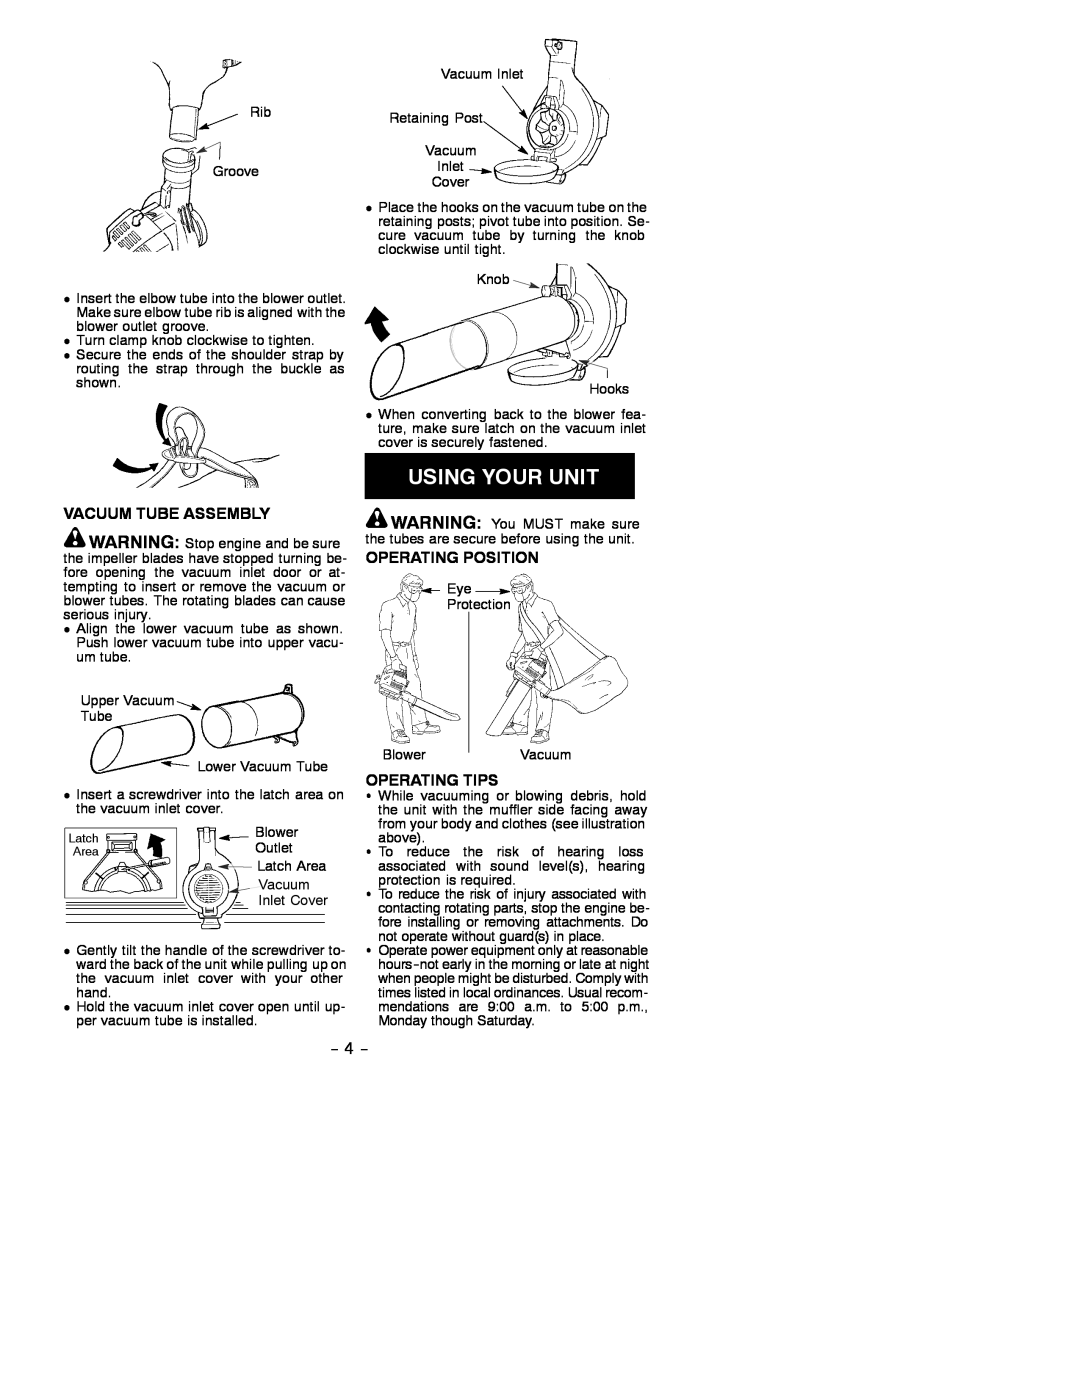 Weed Eater 530086690 instruction manual Vacuum Tube Assembly, Operating Position, Operating Tips 